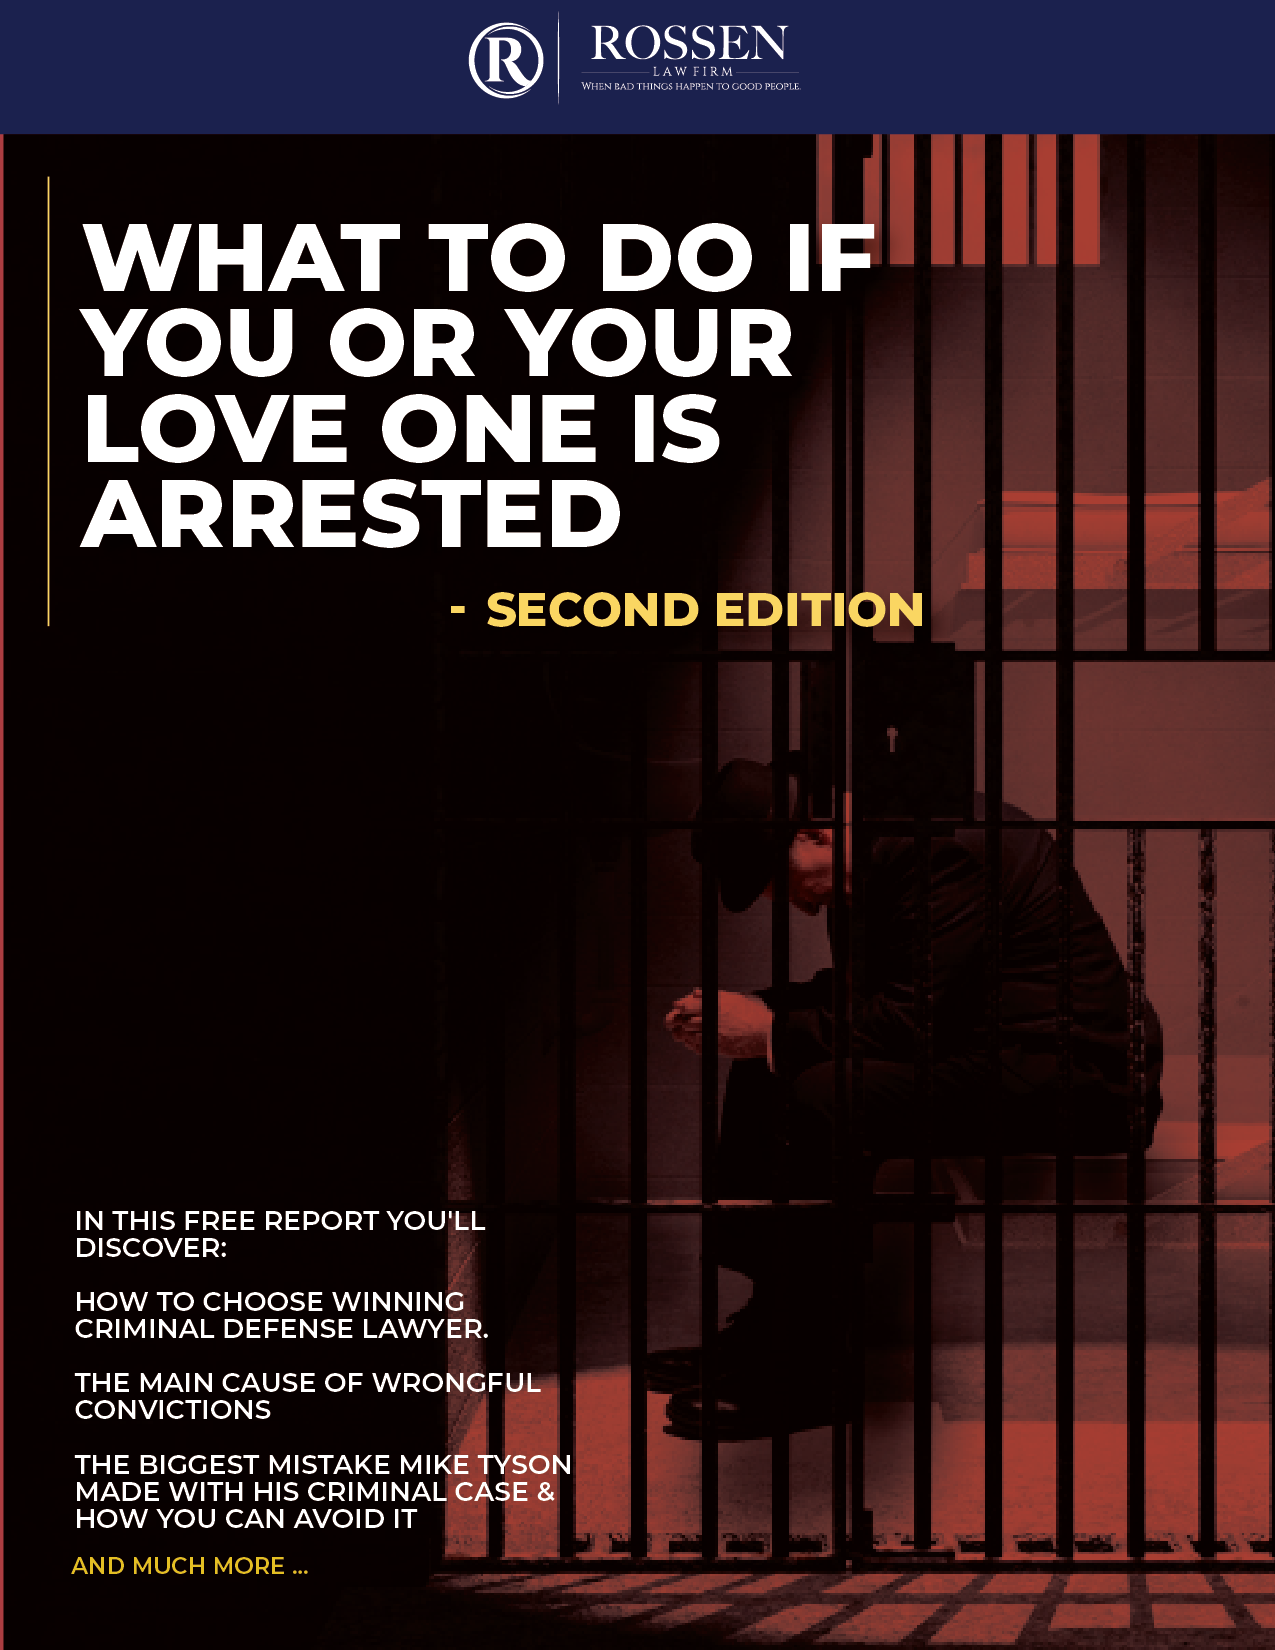 What to Do If You or Your Love One is Arrested